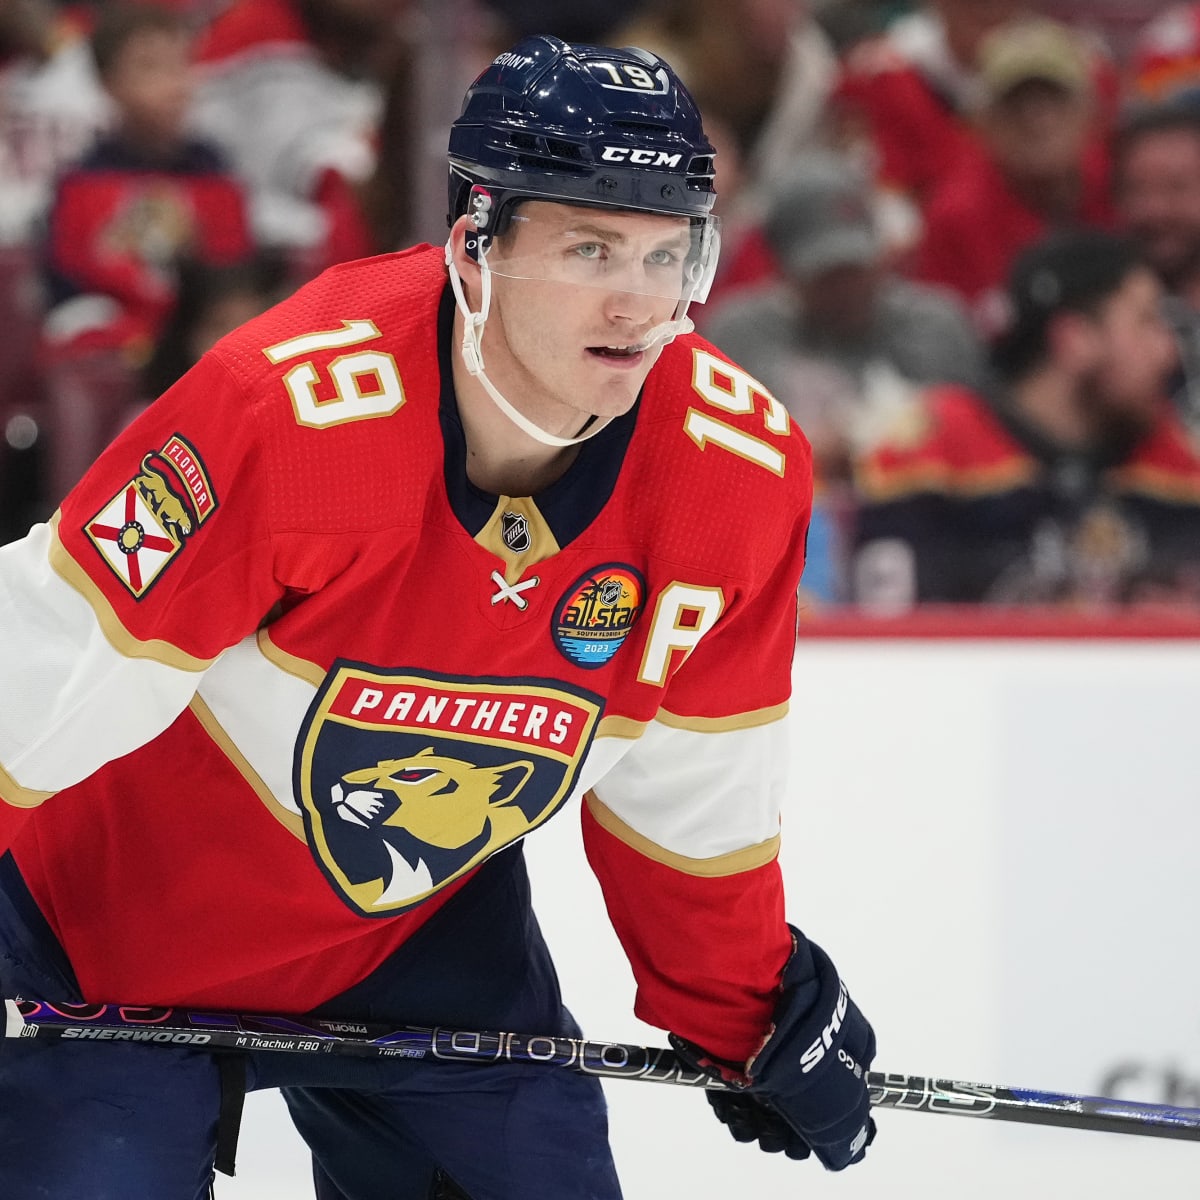 Matthew Tkachuk does the leading, and the Panthers are happily